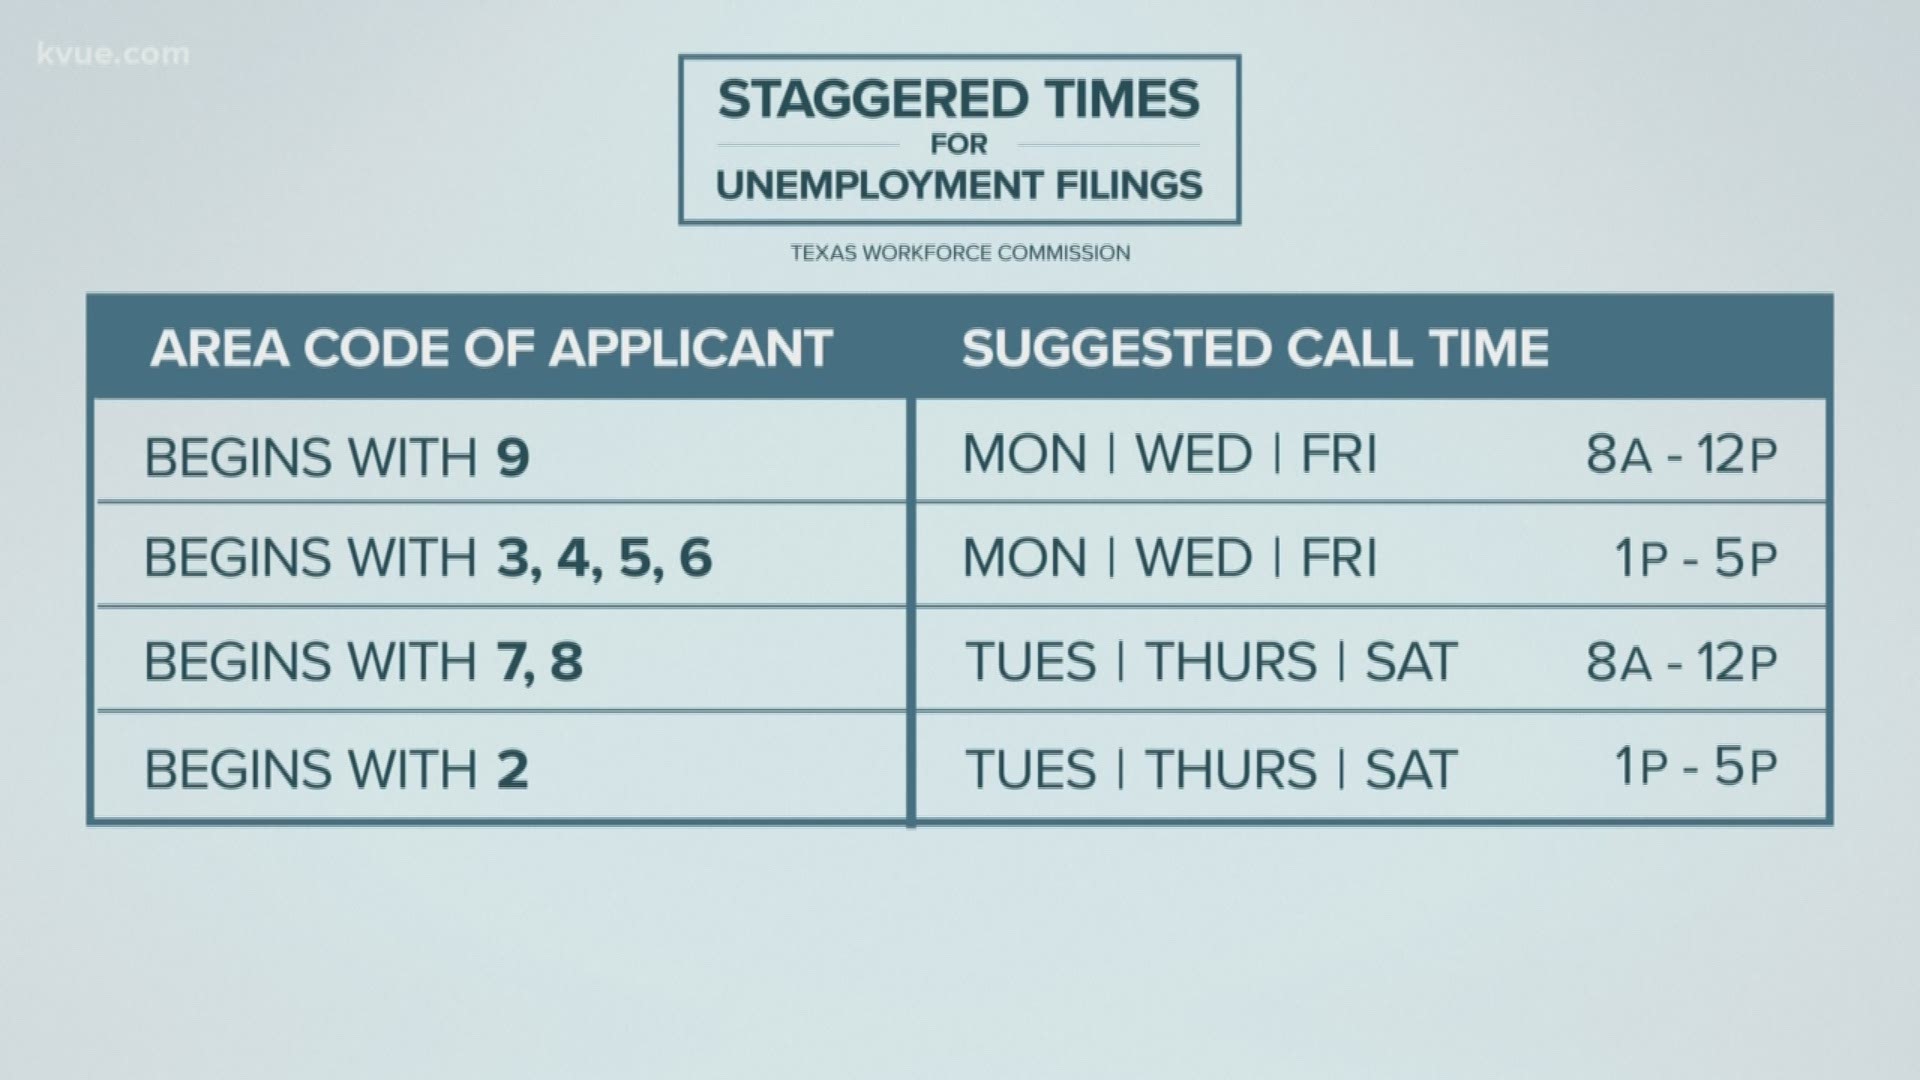 An overwhelmed State of Texas is making changes to ease the unemployment filing process.